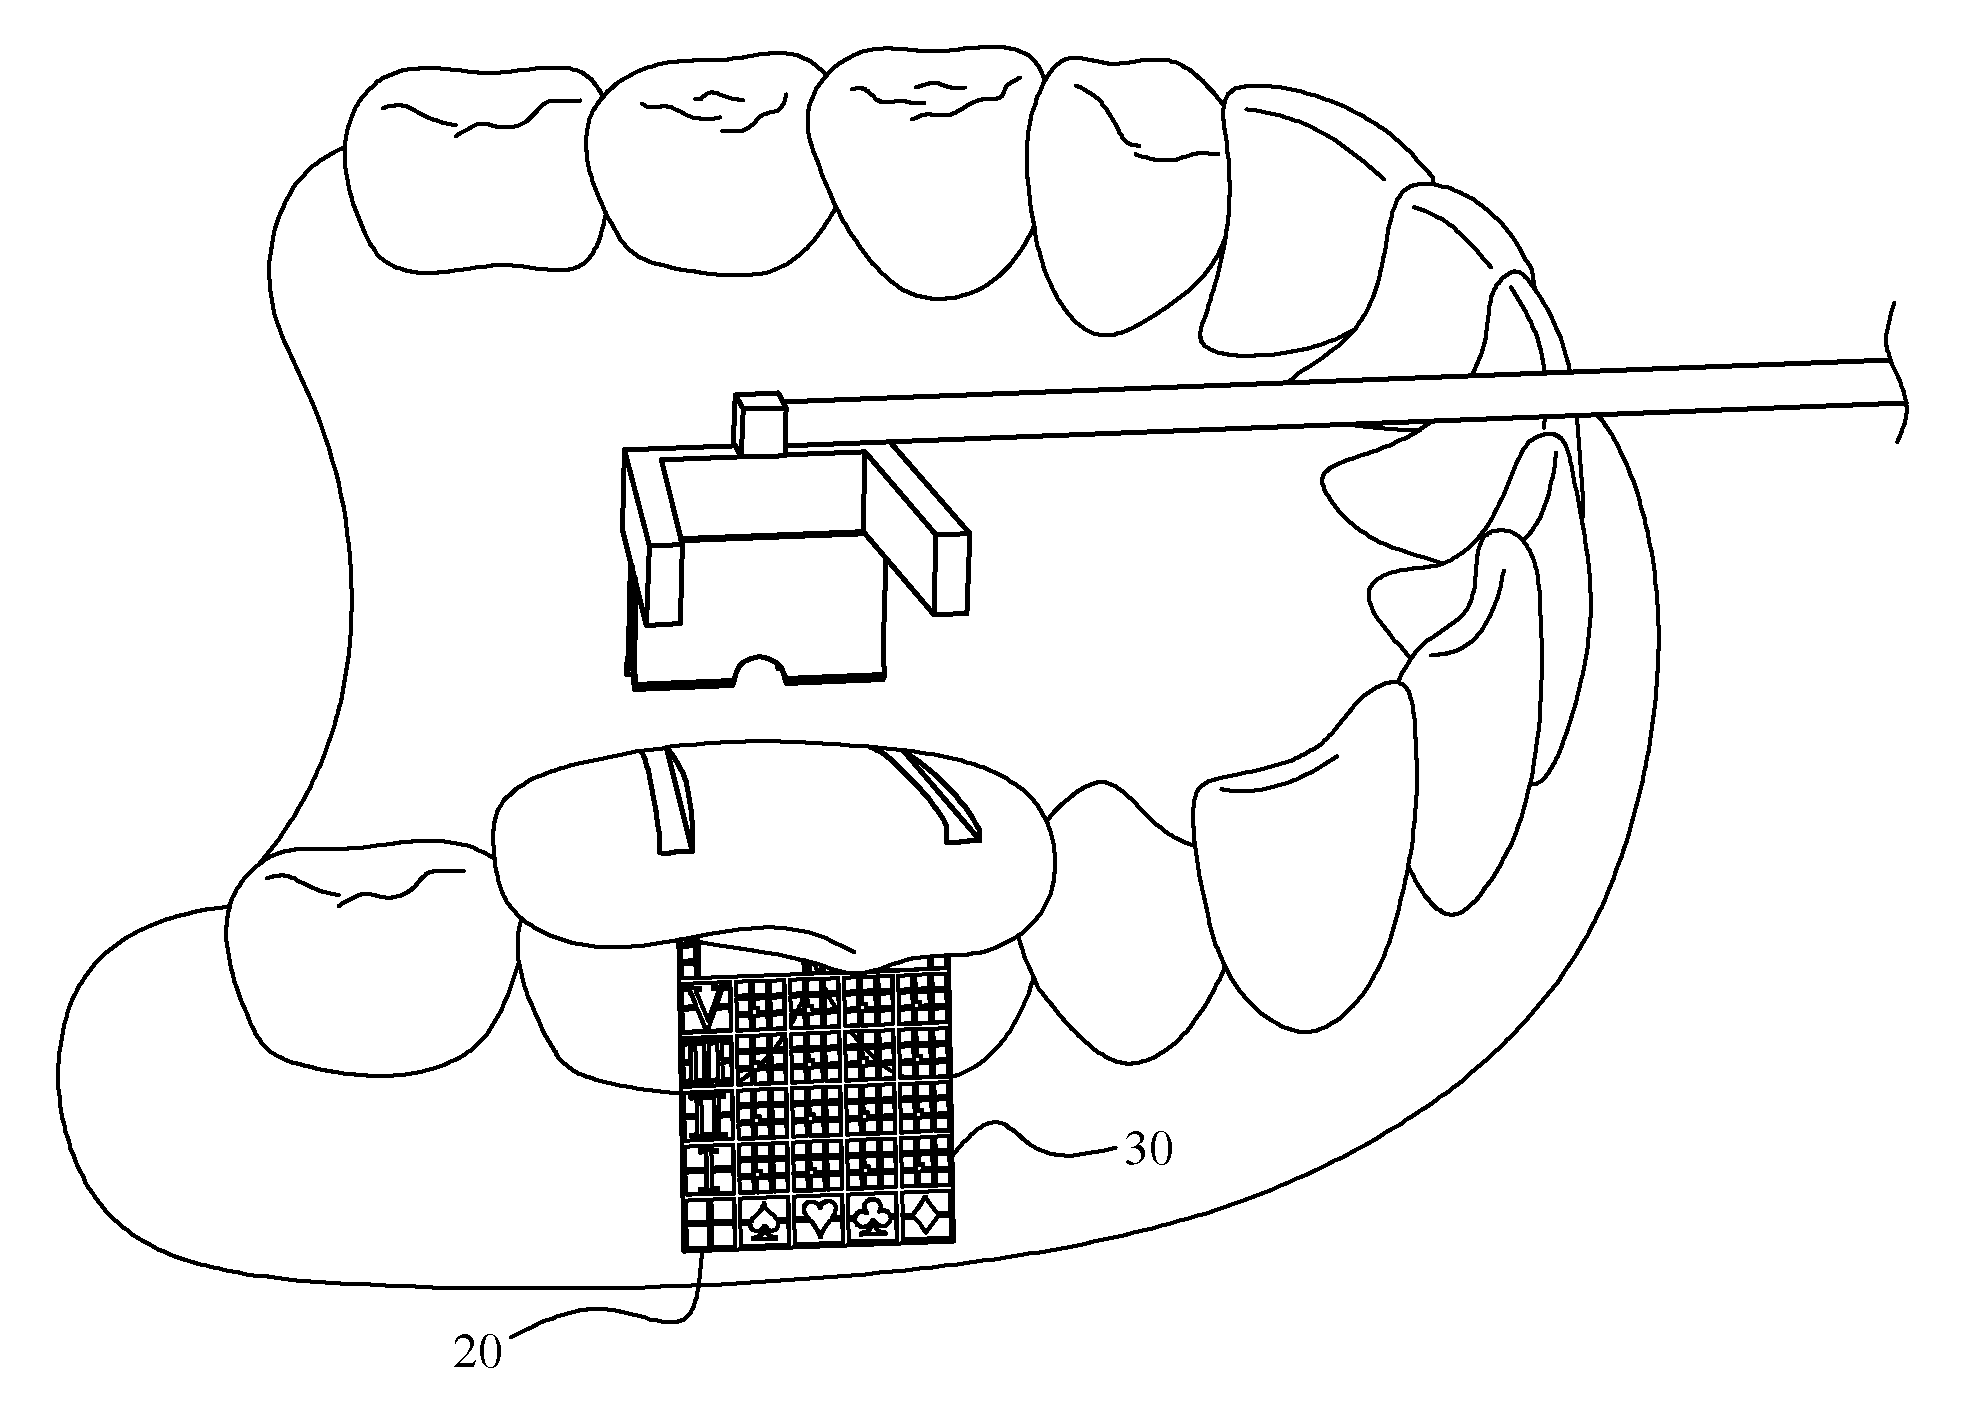 Multi-coordinate orthodontic implant positioning device